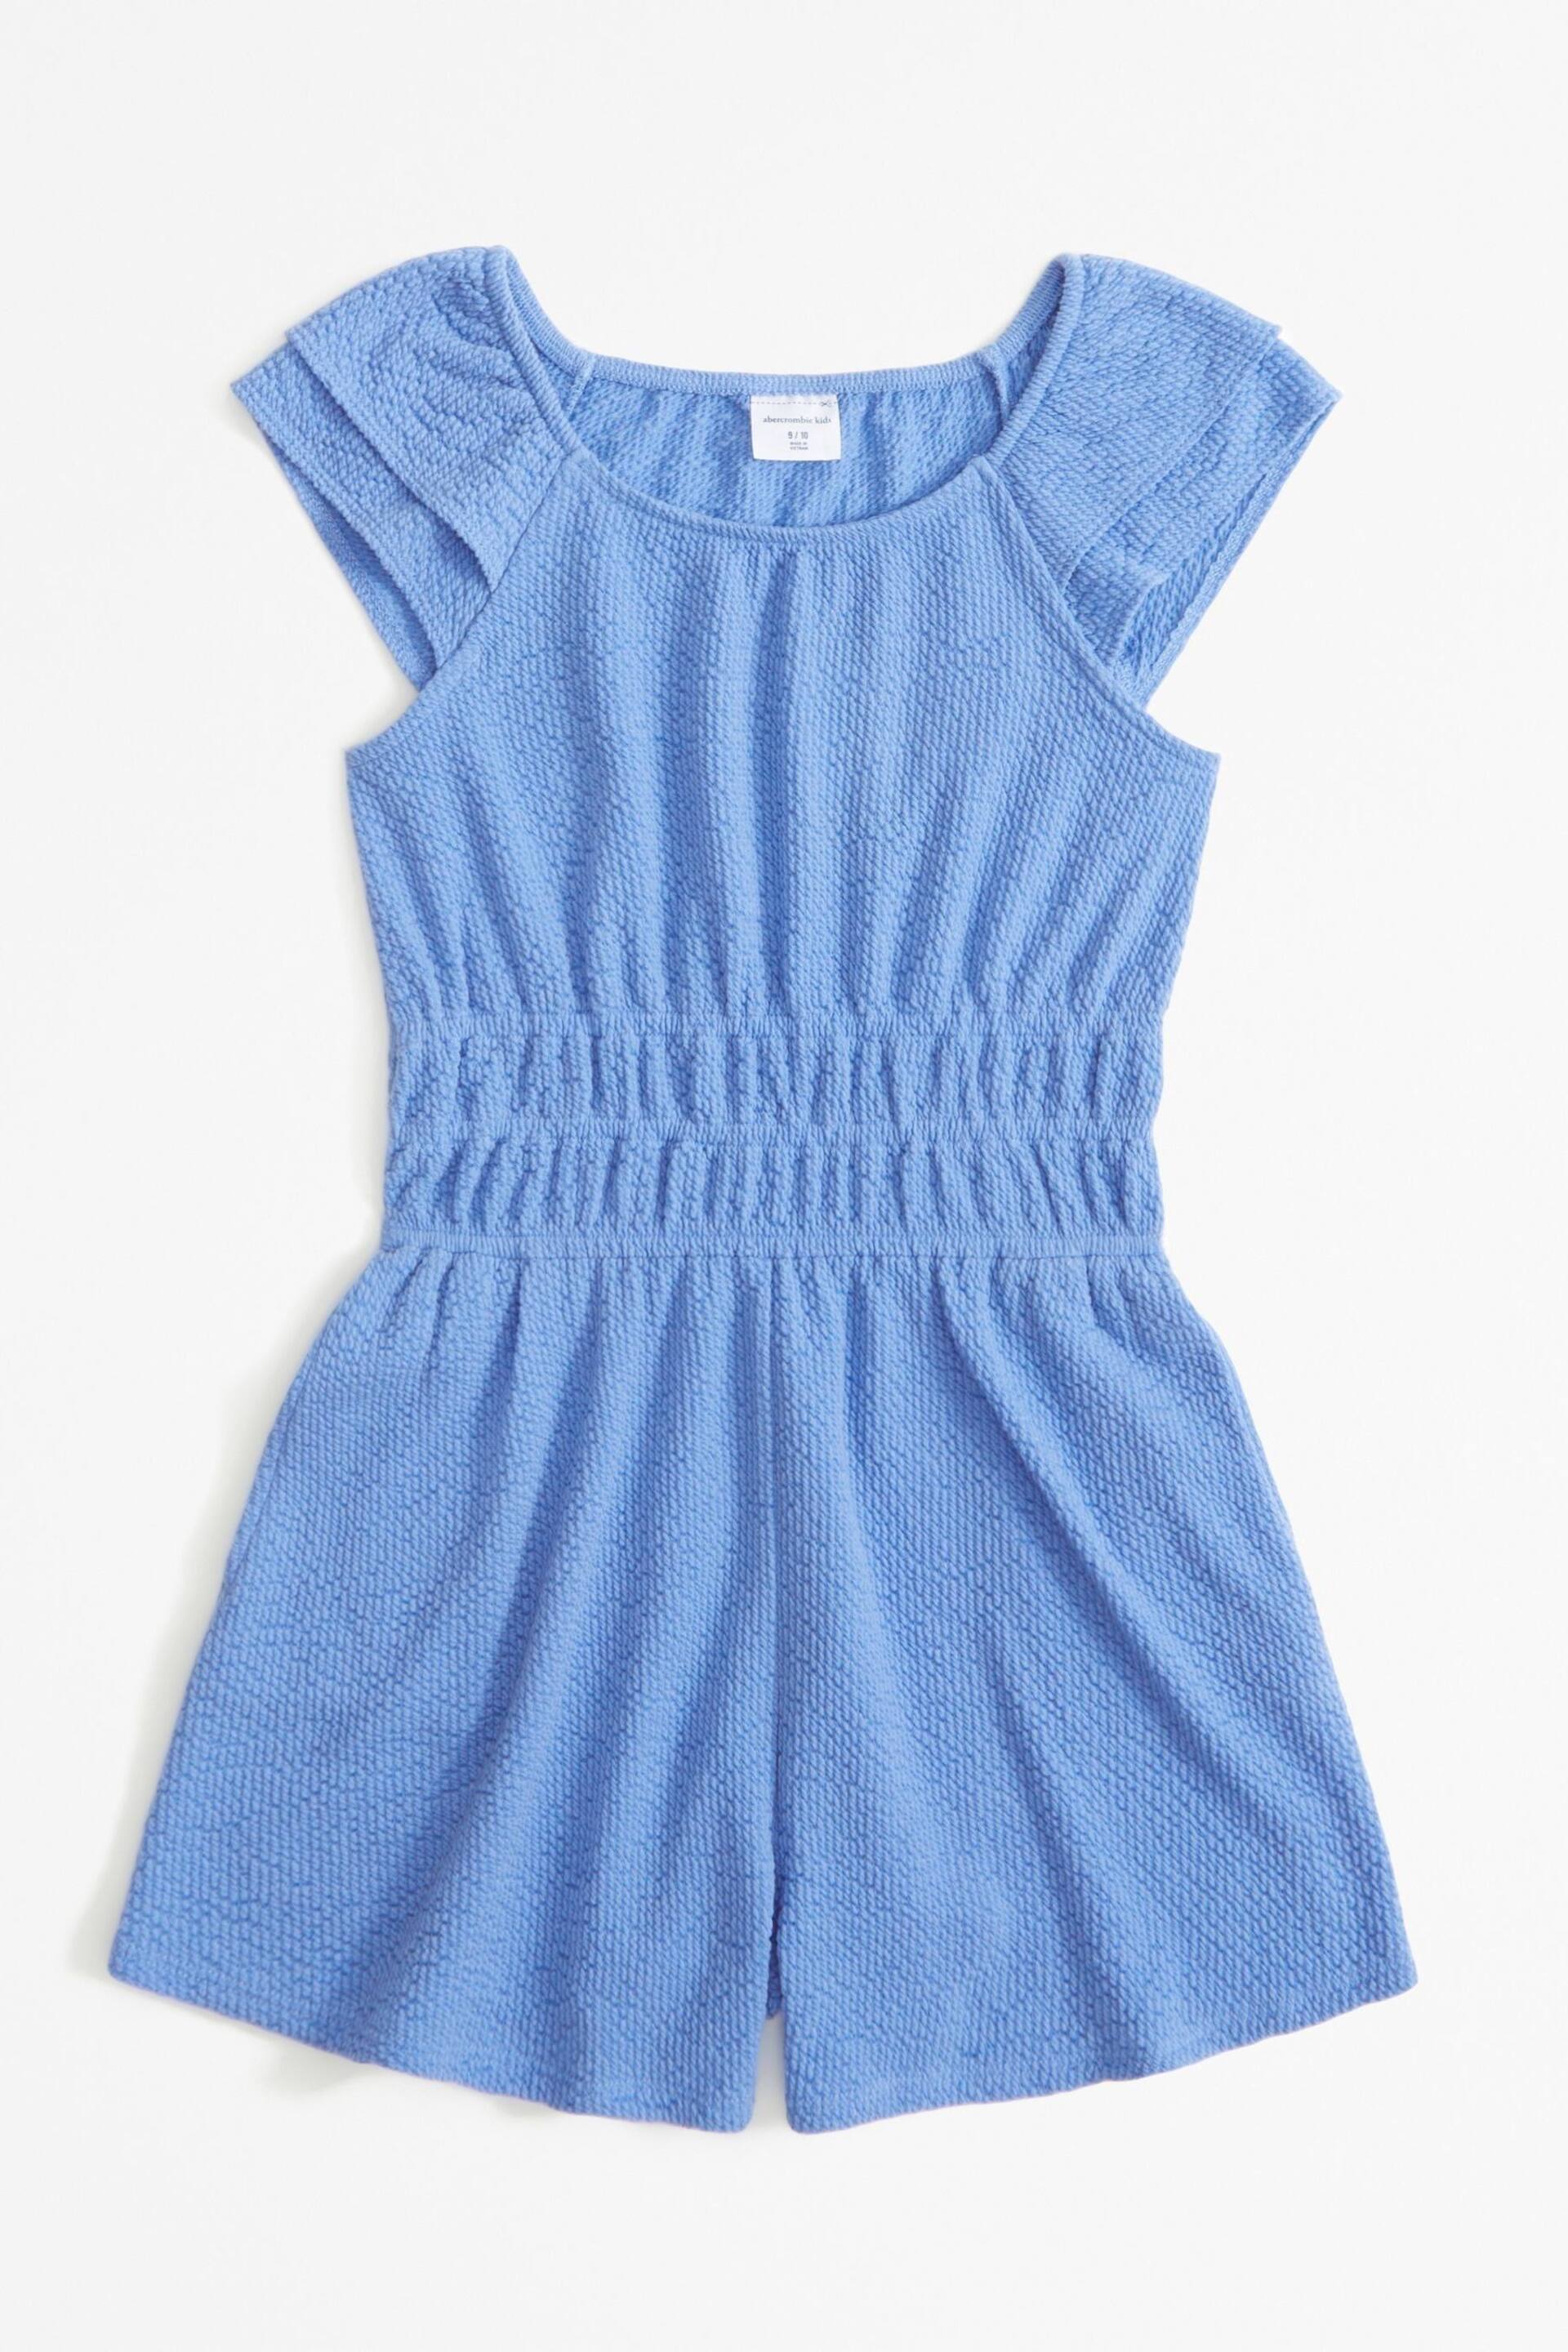 Abercrombie & Fitch Blue Textured Knit Jumpsuit - Image 1 of 2